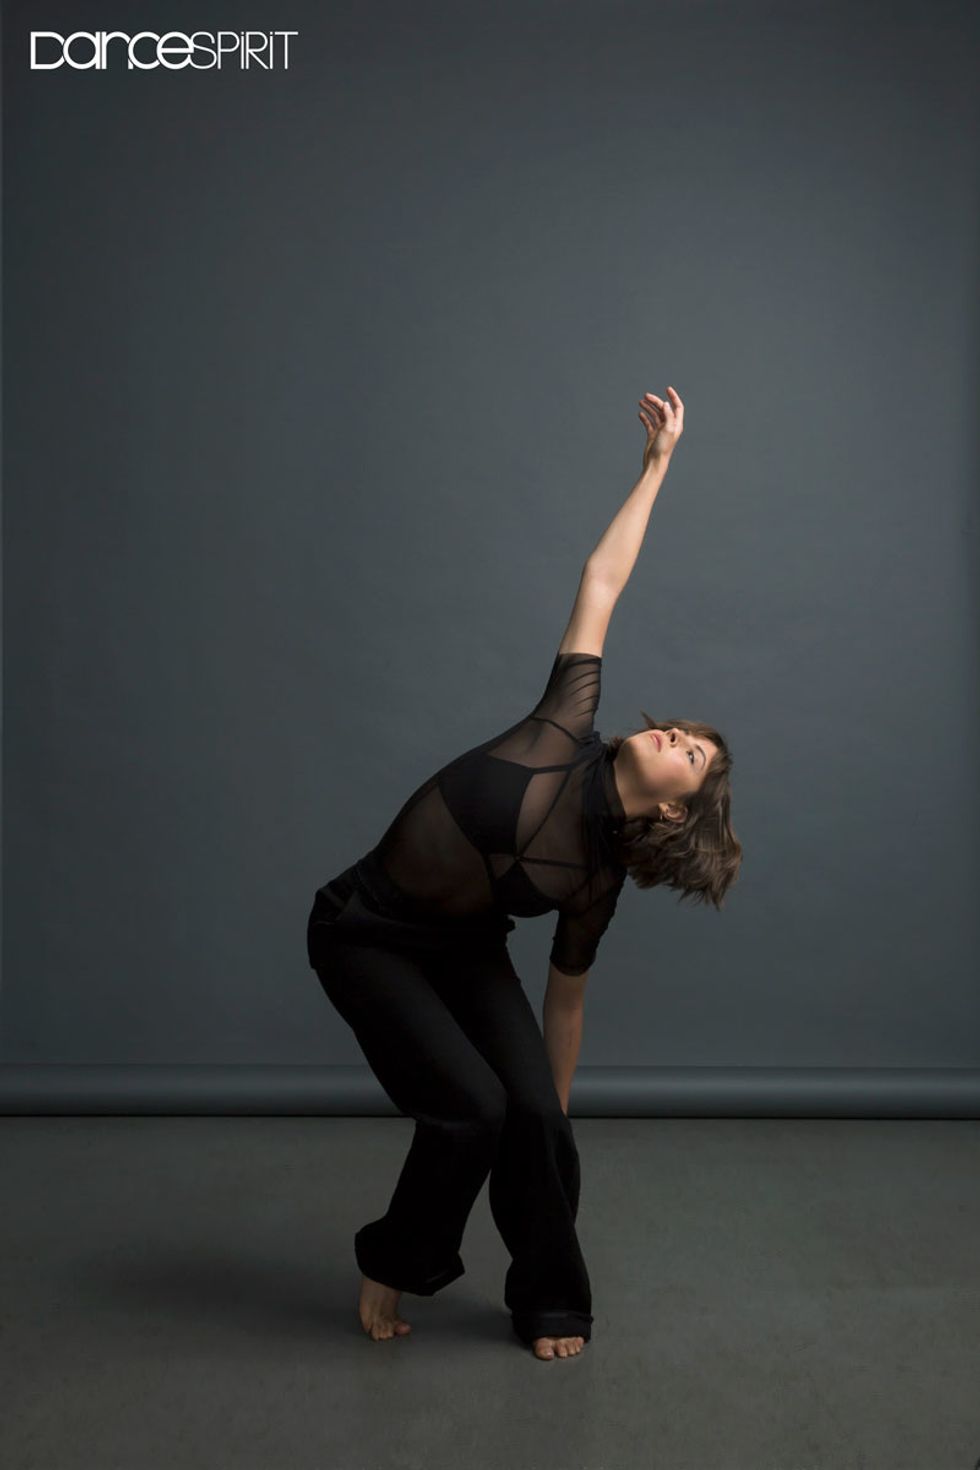 Gianna Reisan with her right foot slightly in front of the left. Her left arm is pushed down towards her left foot, whereas her right arm is outstretched to the ceiling above her. She is facing upwards.